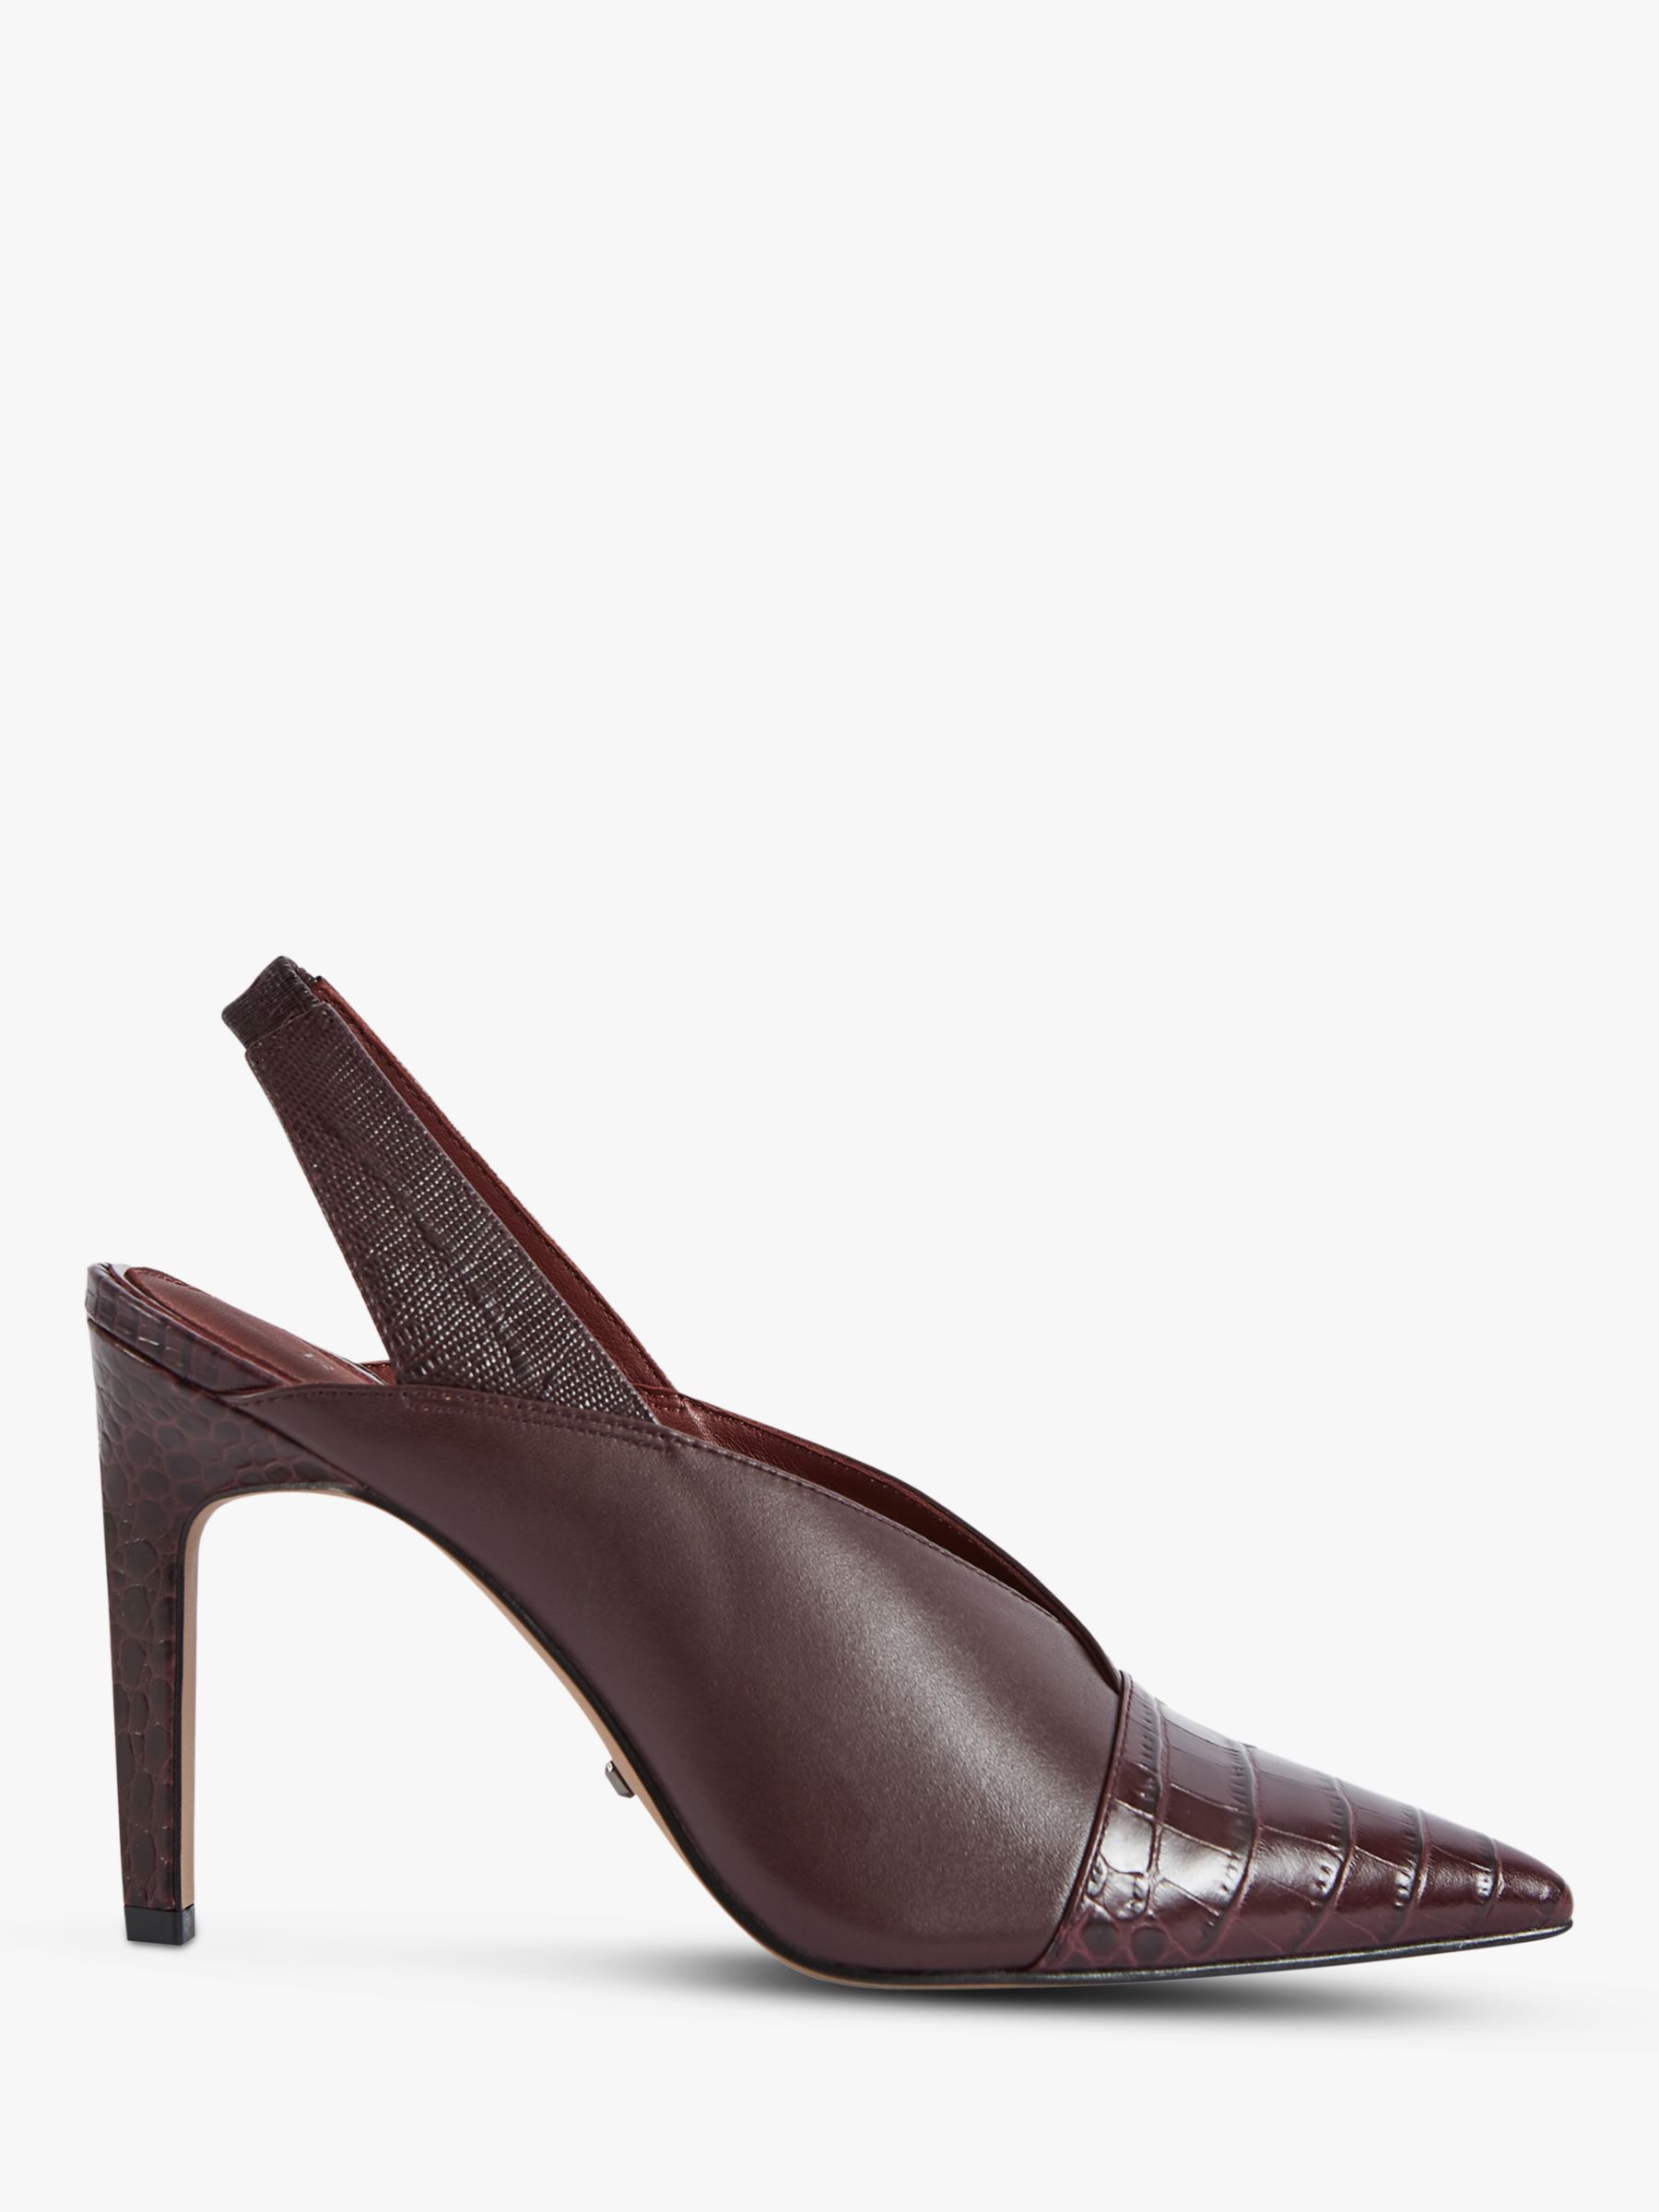 Reiss Angelica Leather Sling Back Heels